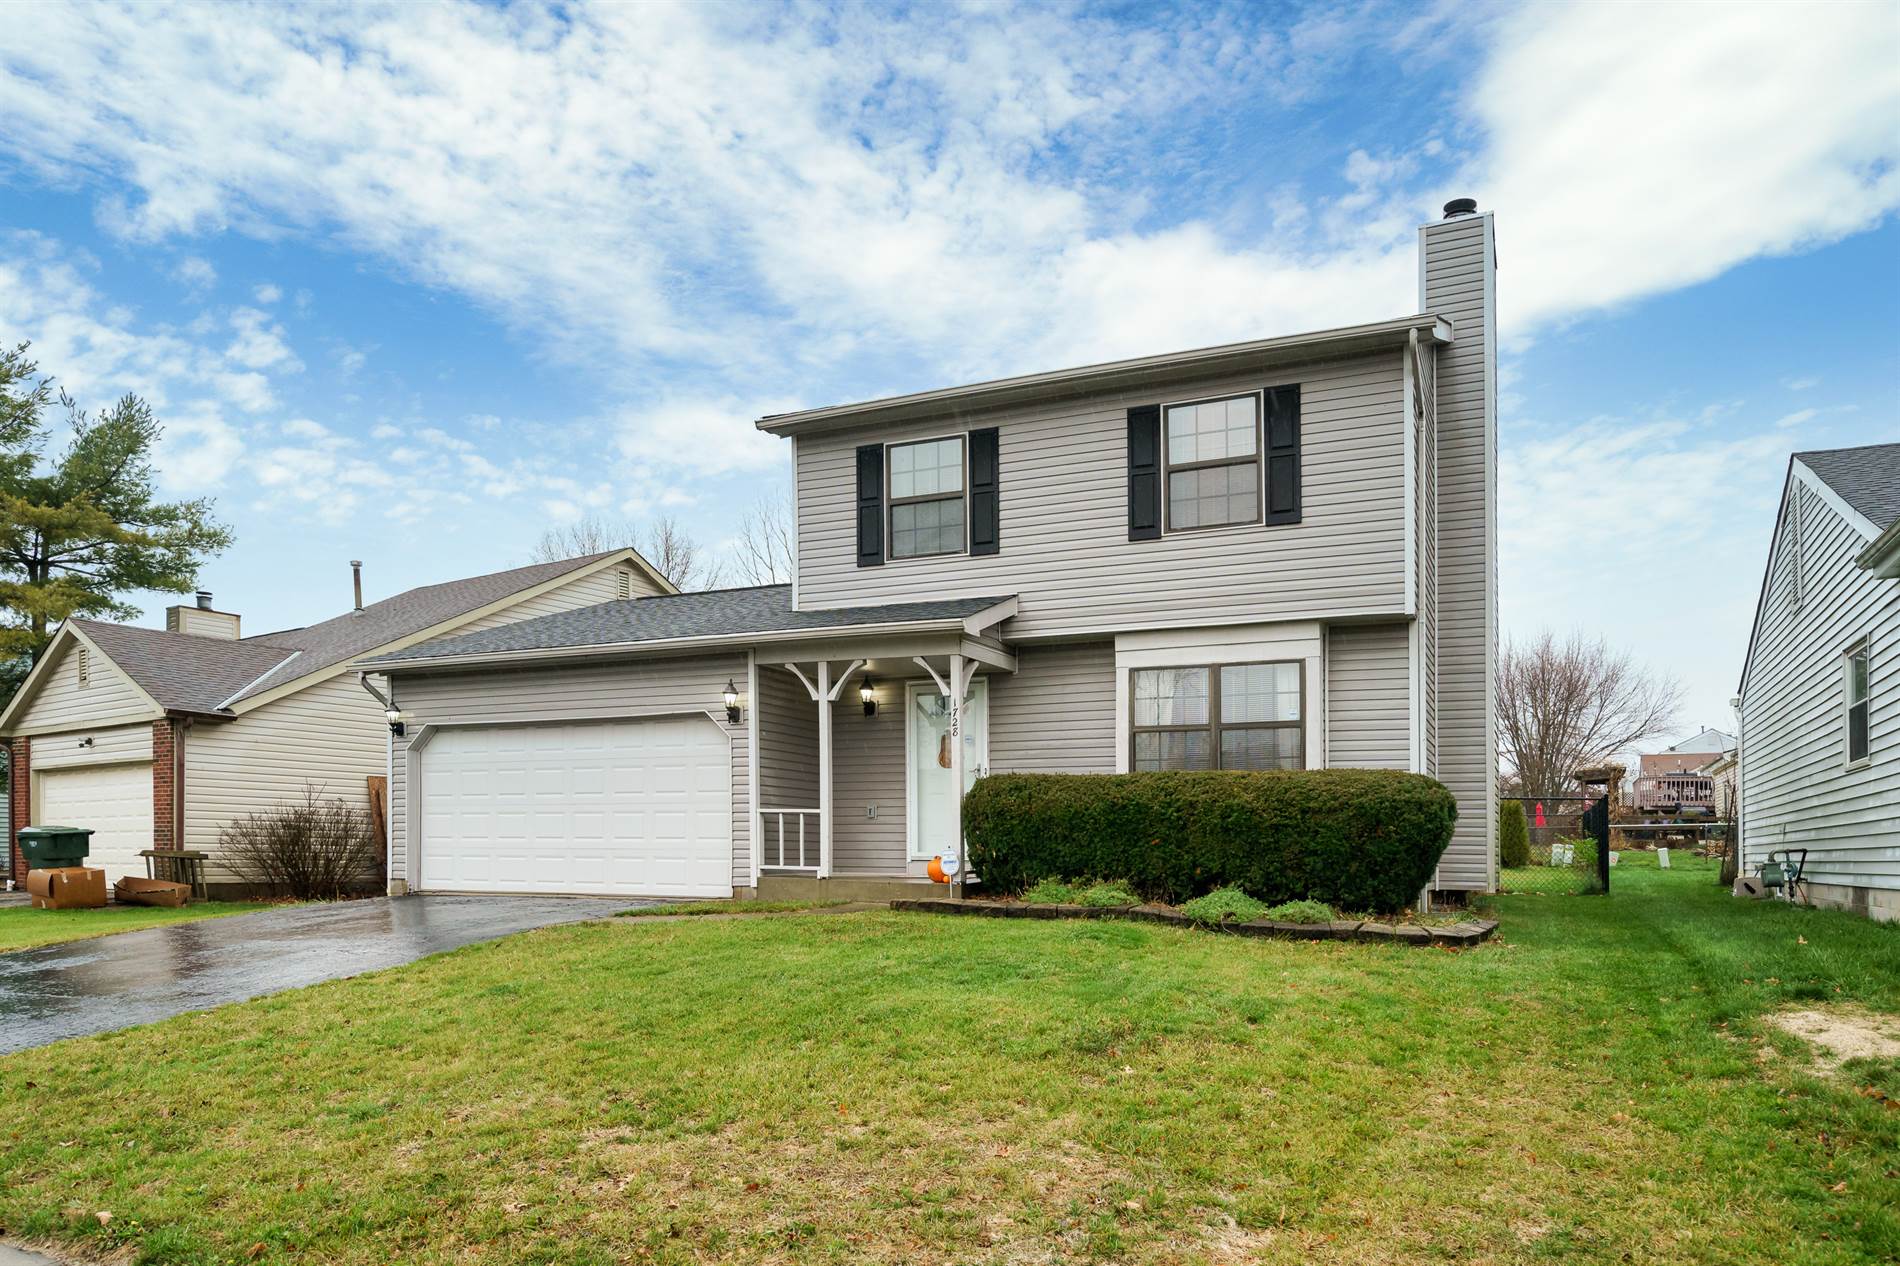 1728 Stagecoach Court, Powell, OH 43065